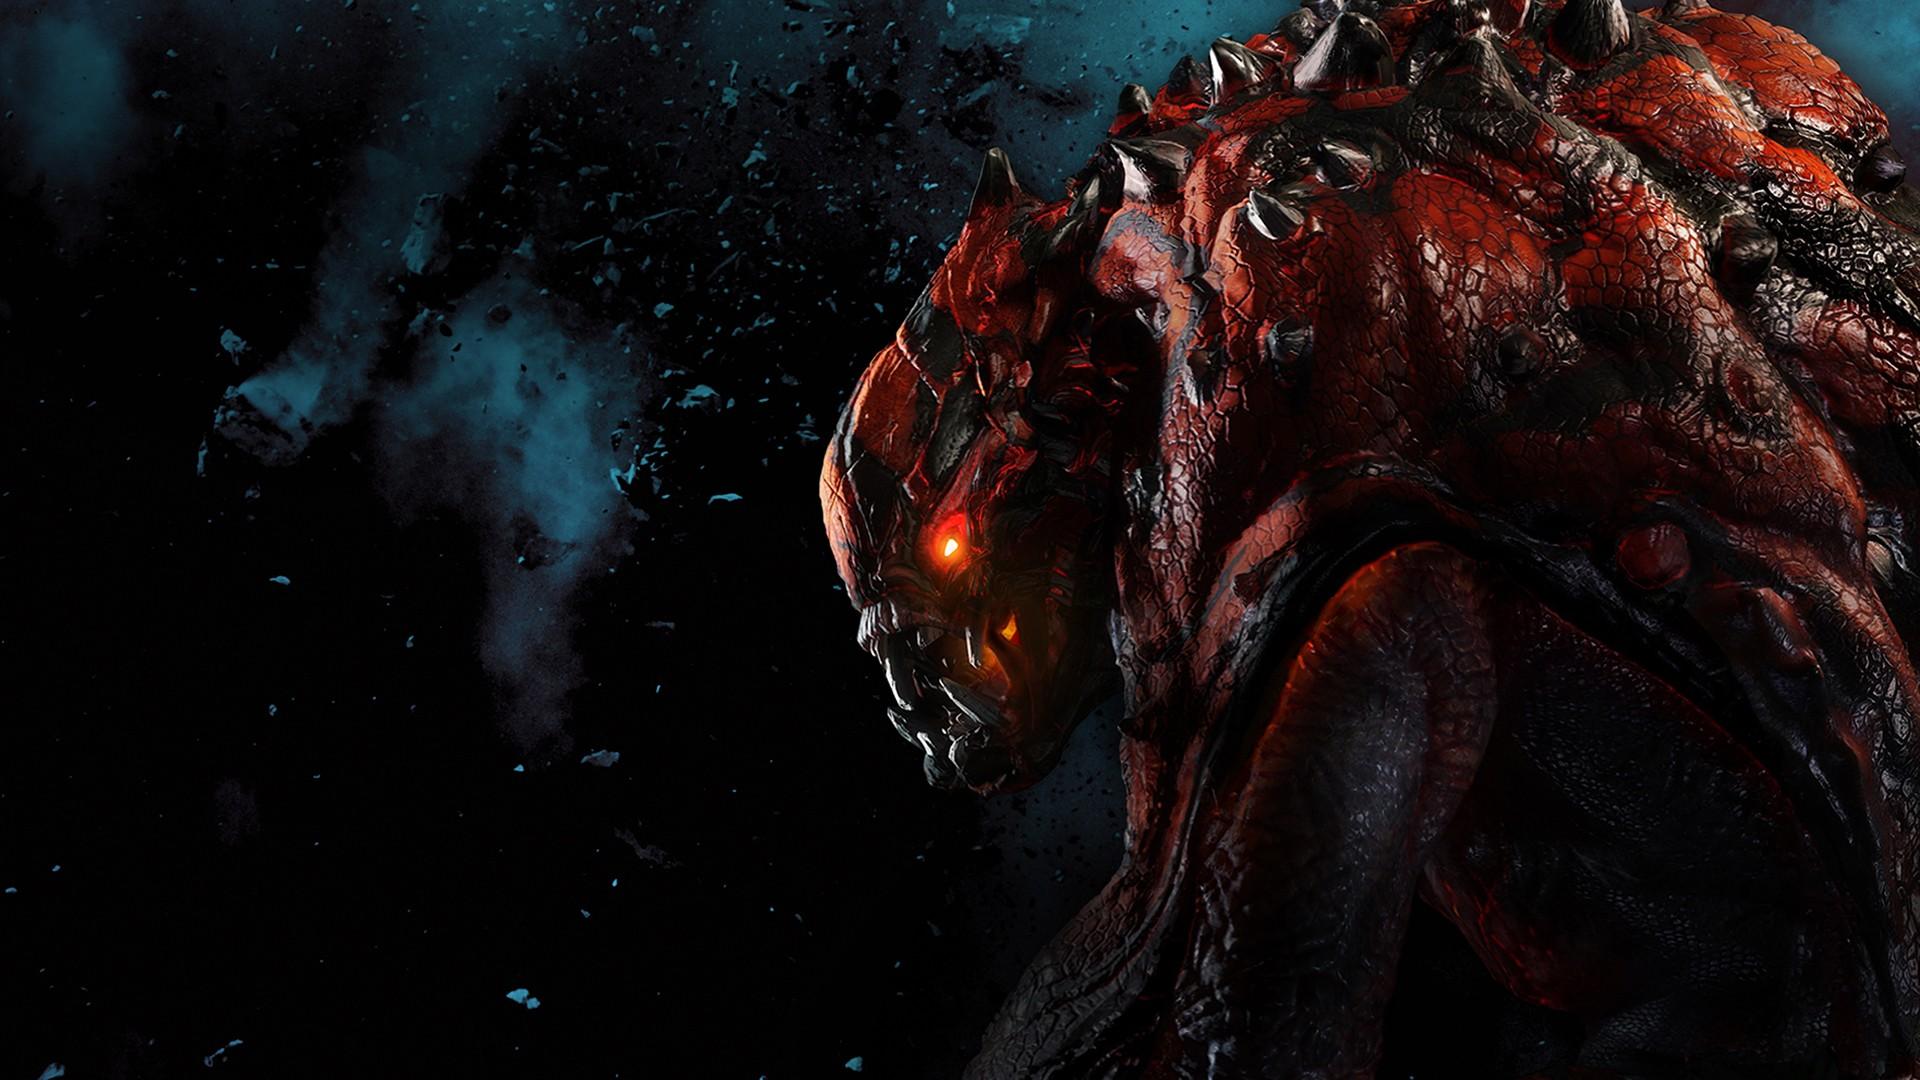 HD wallpaper, Goliath Evolve, Evolve Wallpapers, Games Wallpapers